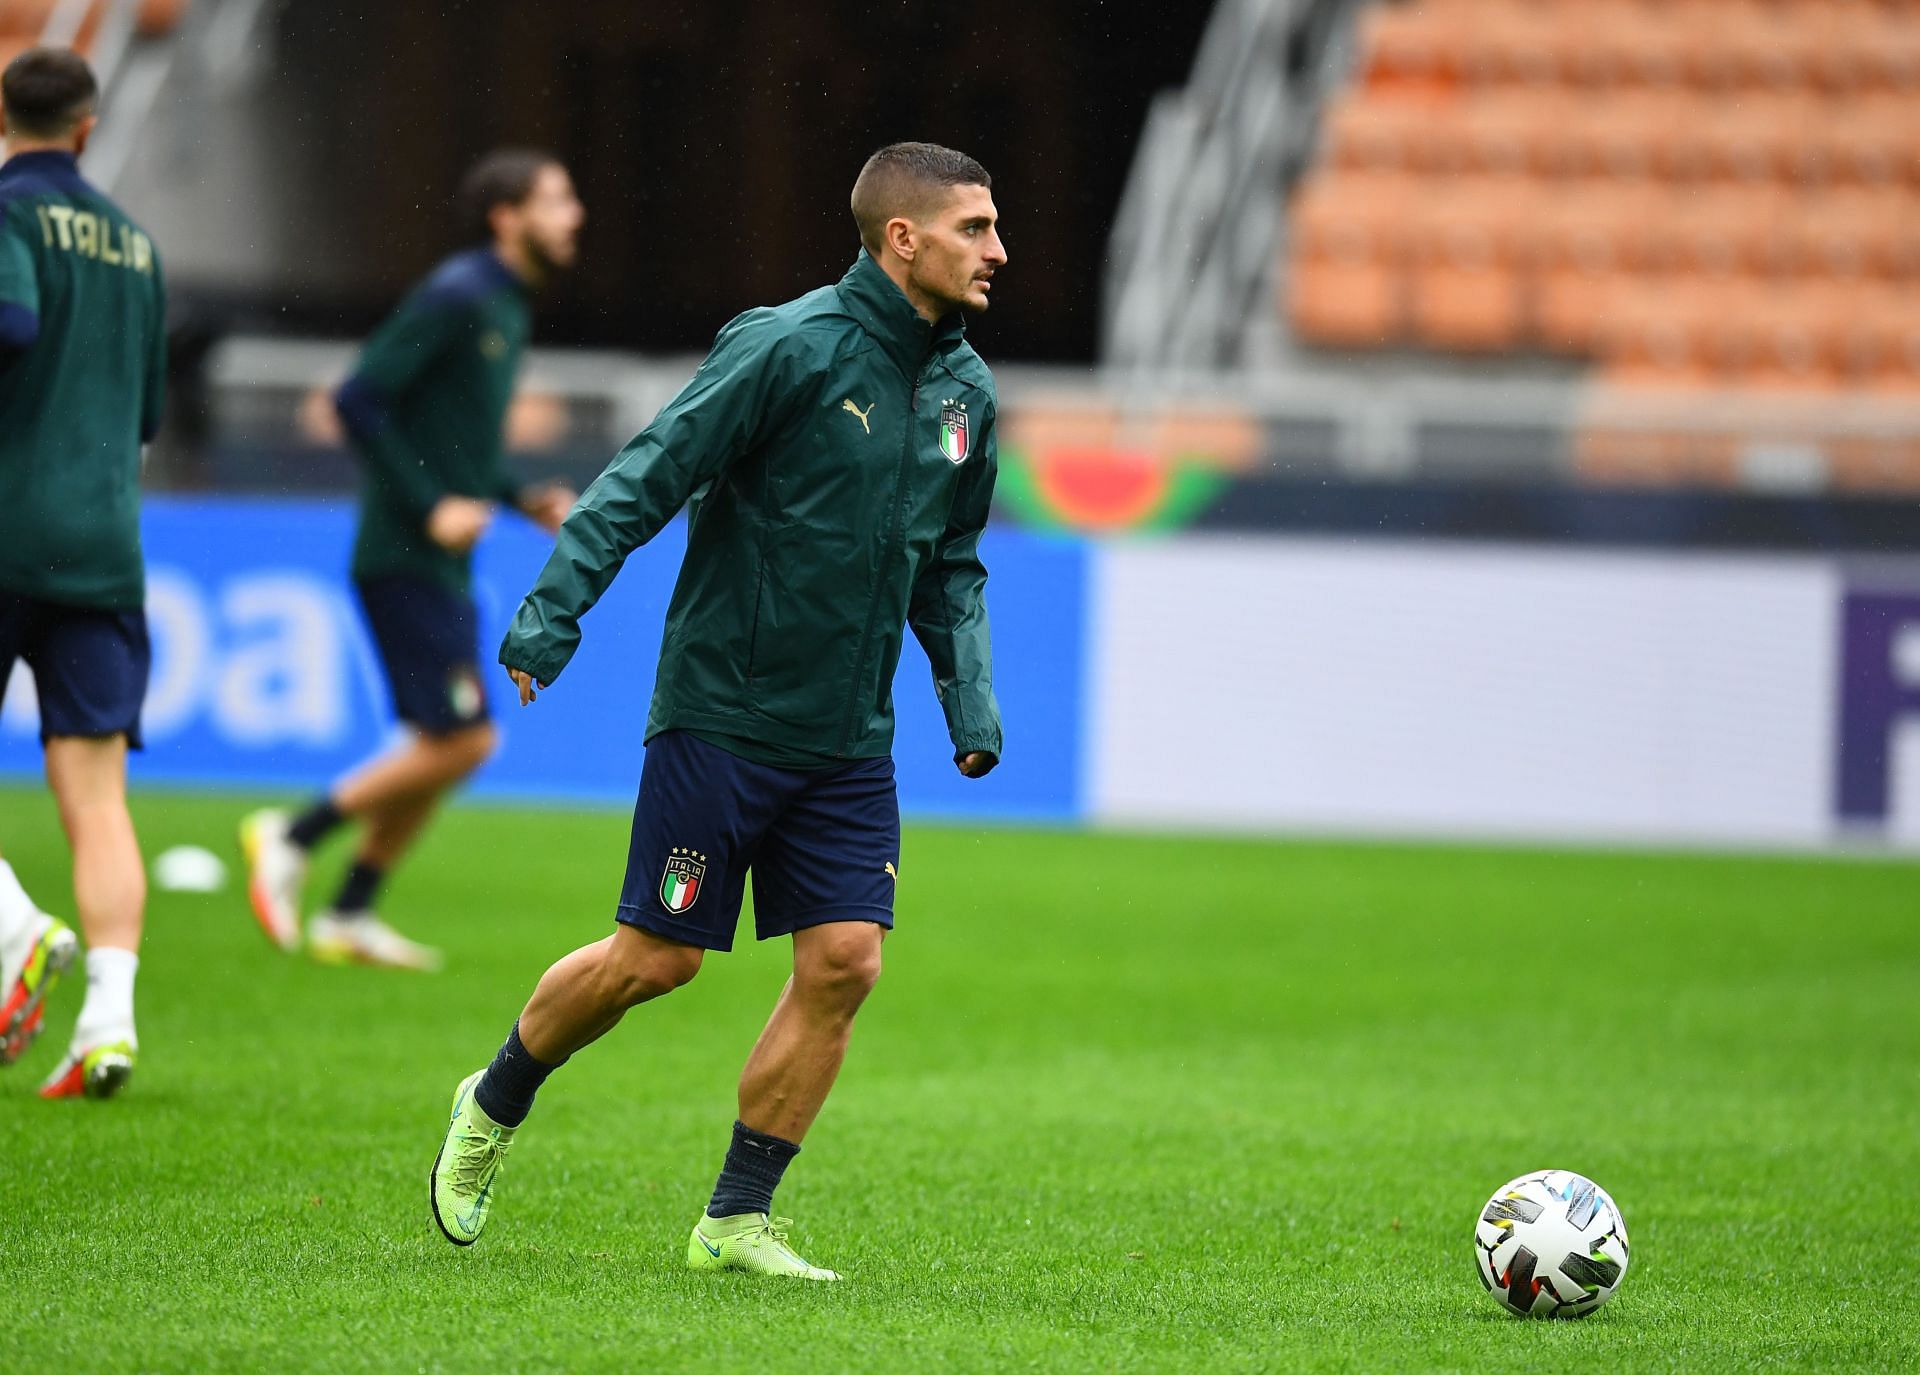 Marco Verratti at an Italy training session